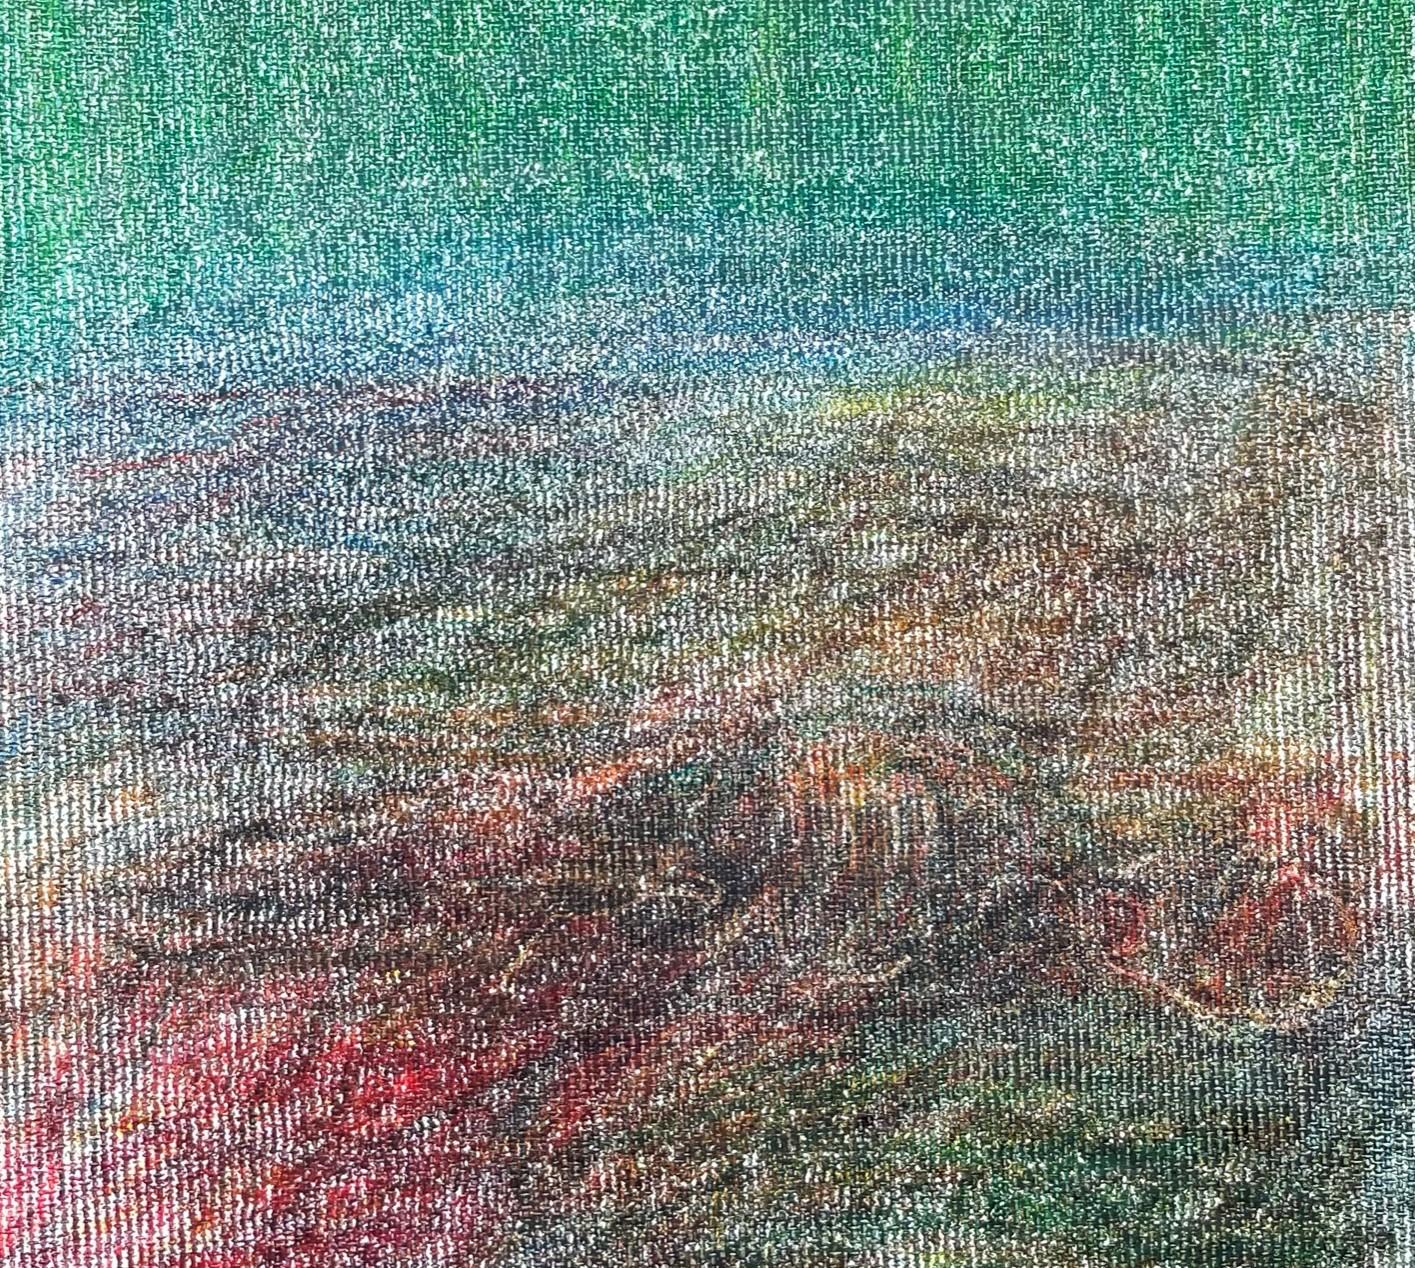 Body in the Field #6, 2022
coloured pencils on canvas

25 H x 16 W cm

Signed on reverse

Zsolt Berszán embodies in his works the dissolution of the human body through the prism of the fragment, the body in pieces, and the skeletal carcass. It is